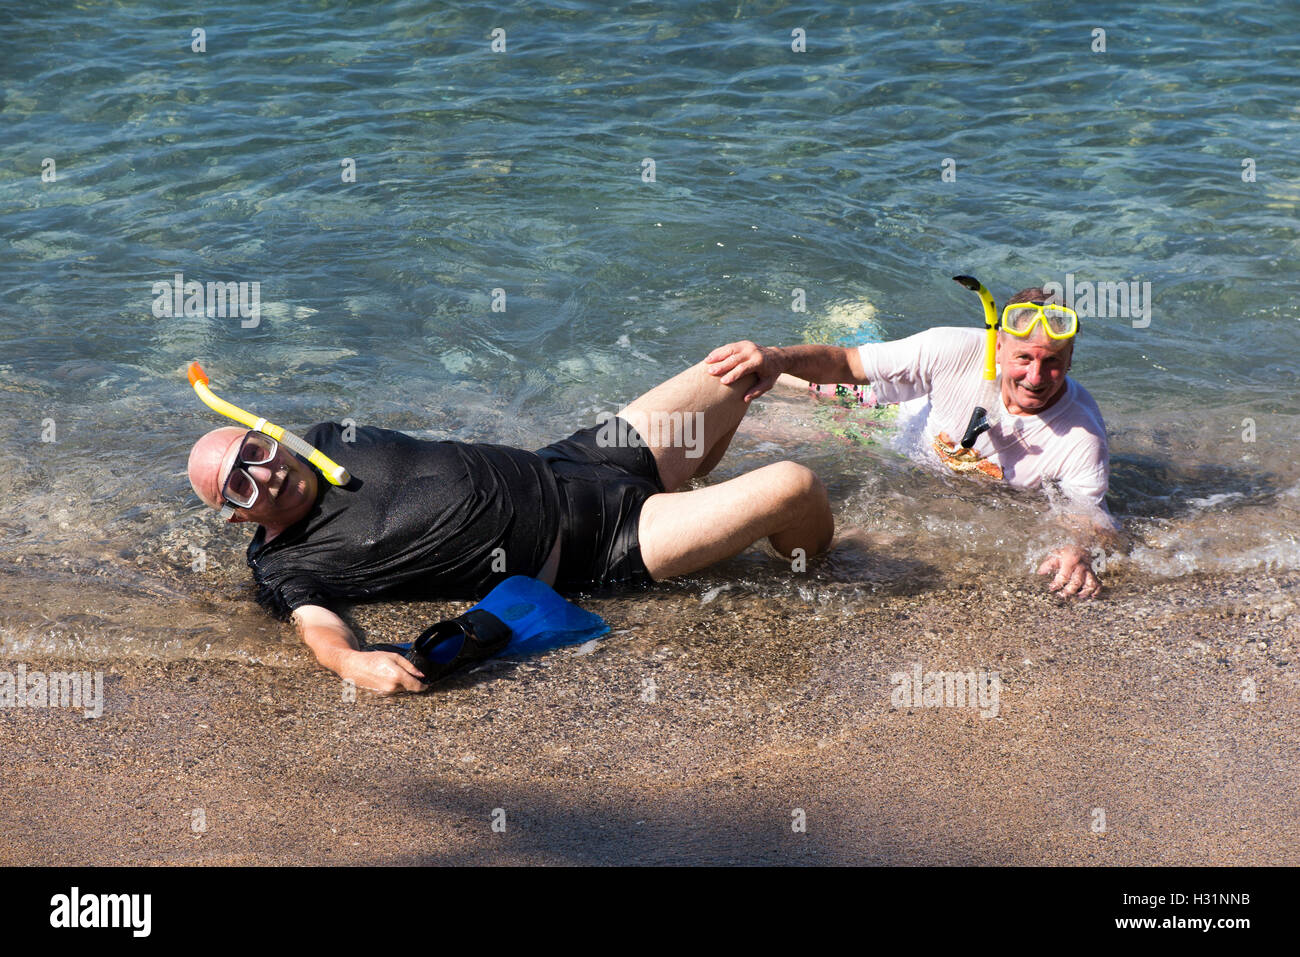 Indonesia, Bali, Amed, snorkeling, two tourist snorkellers lying in sea Stock Photo